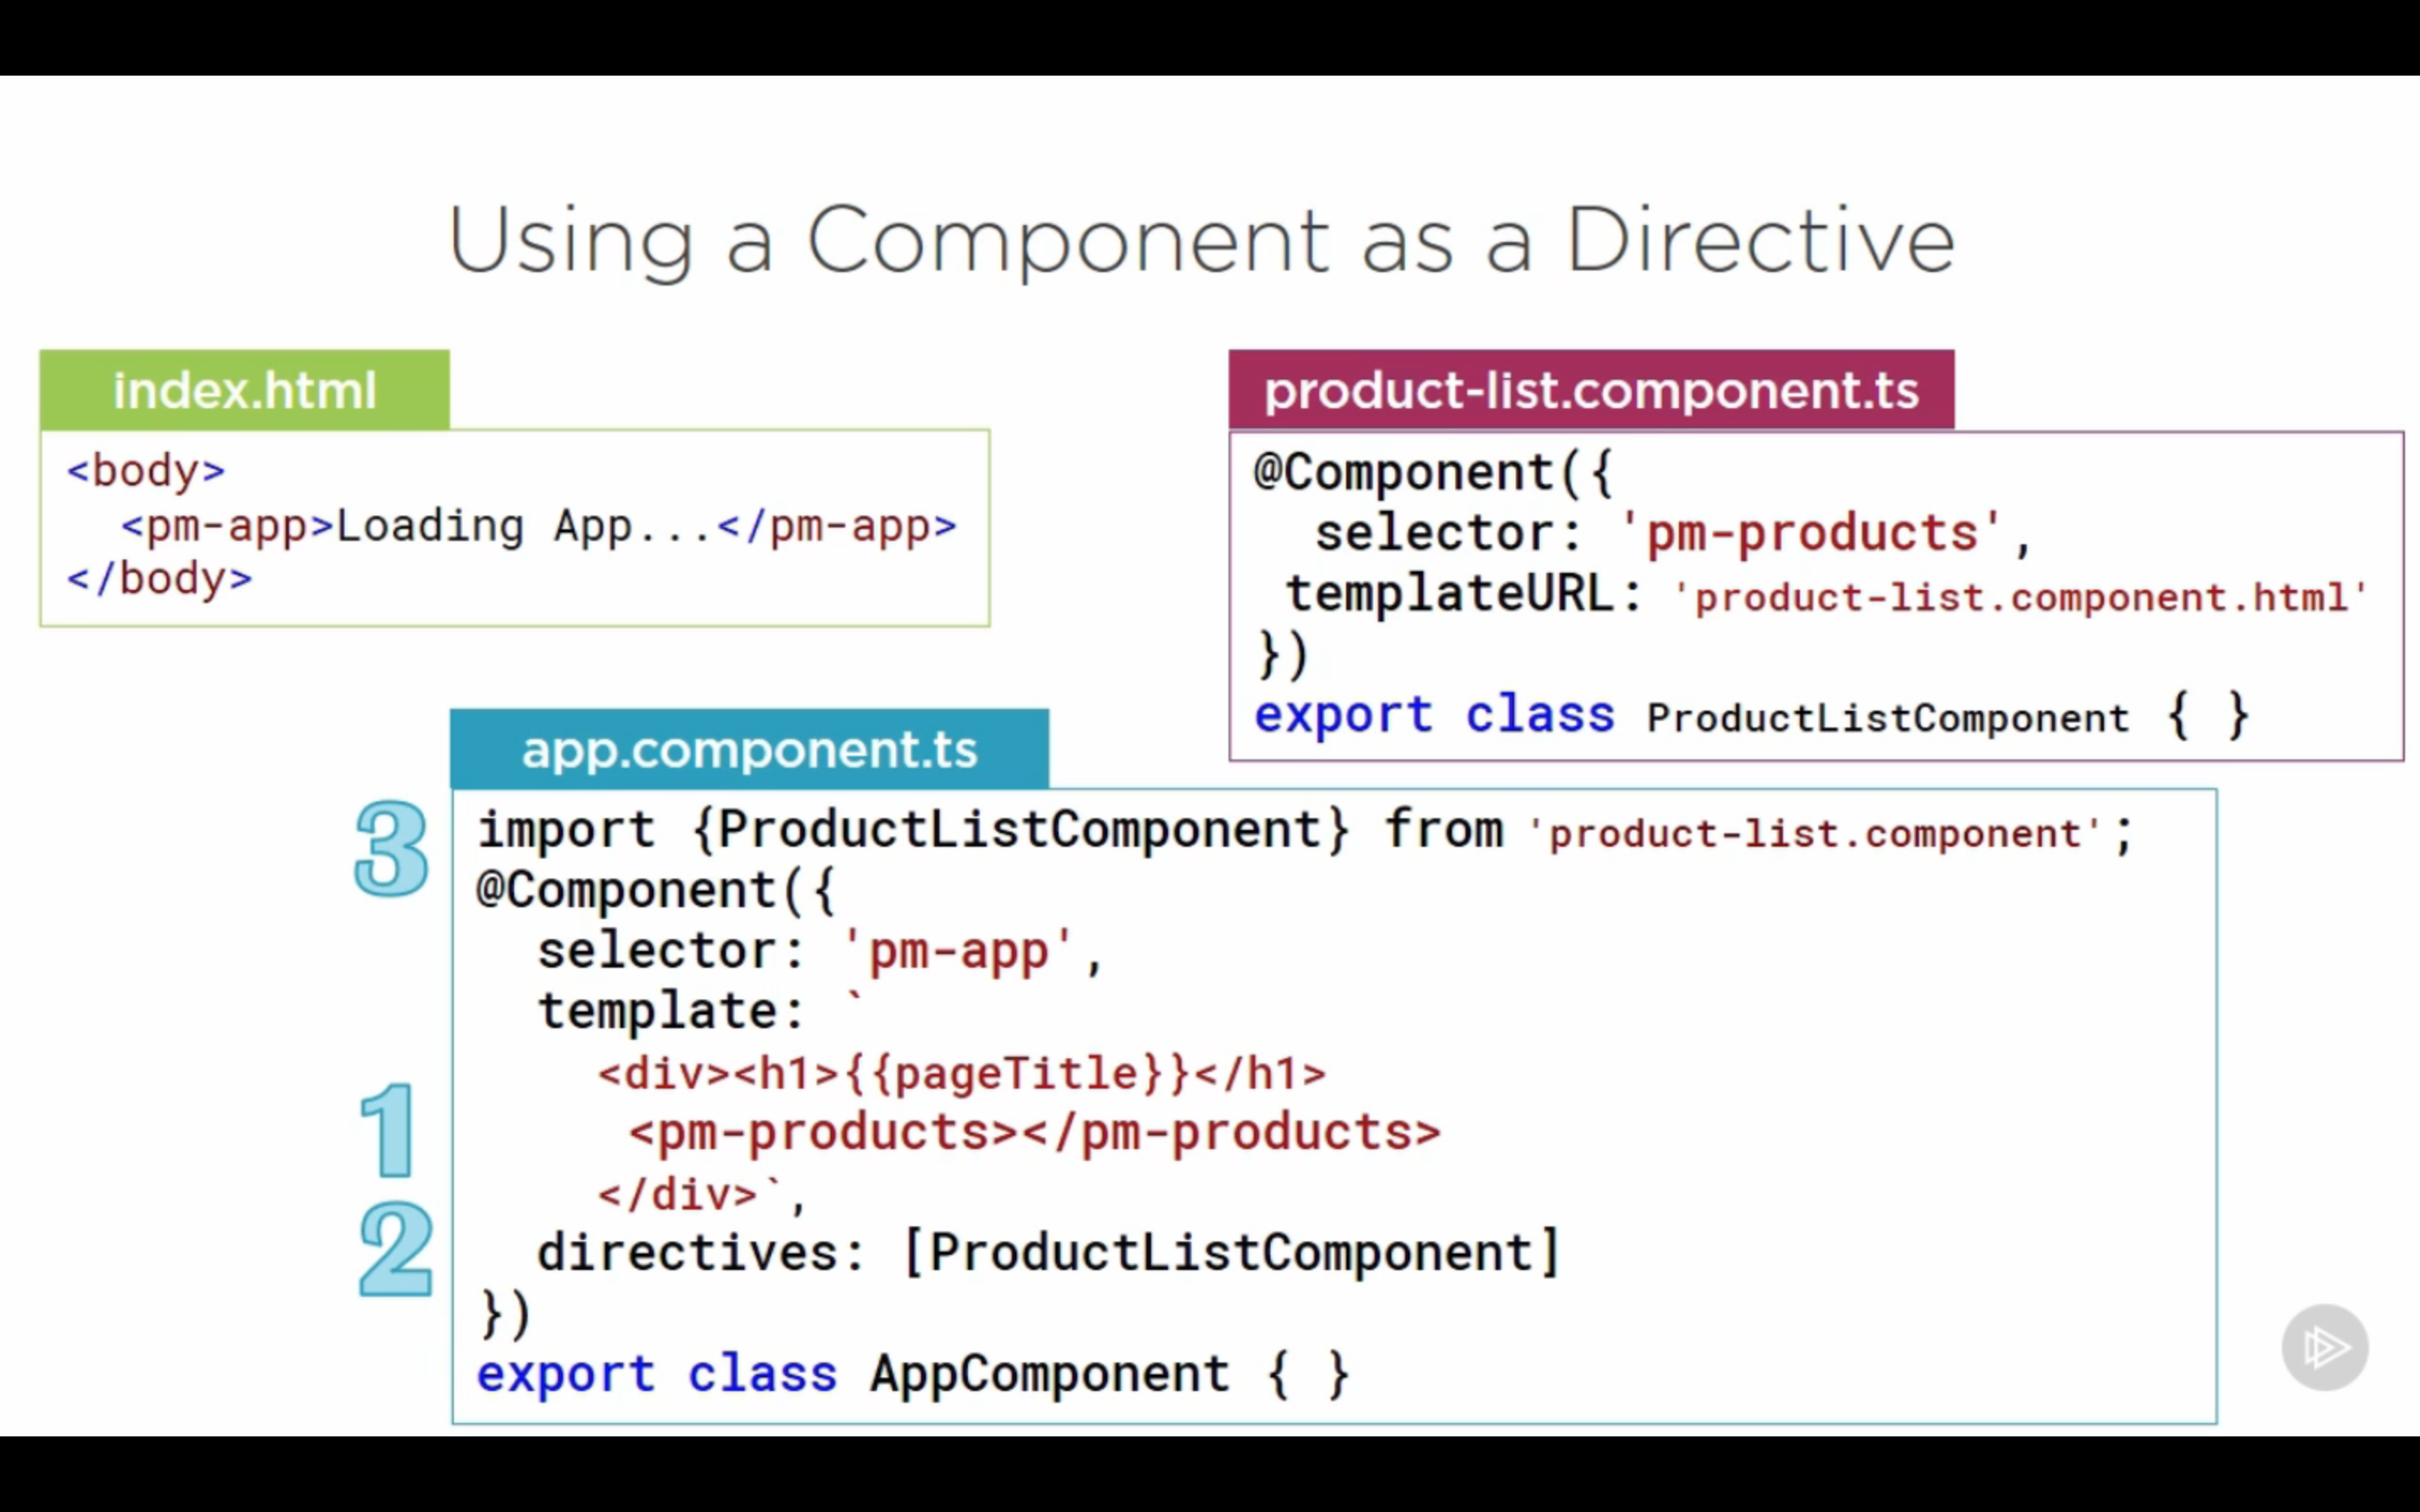 3 steps to use directive component as directive. Directive prop: classname in component. (We may have other choices later.)